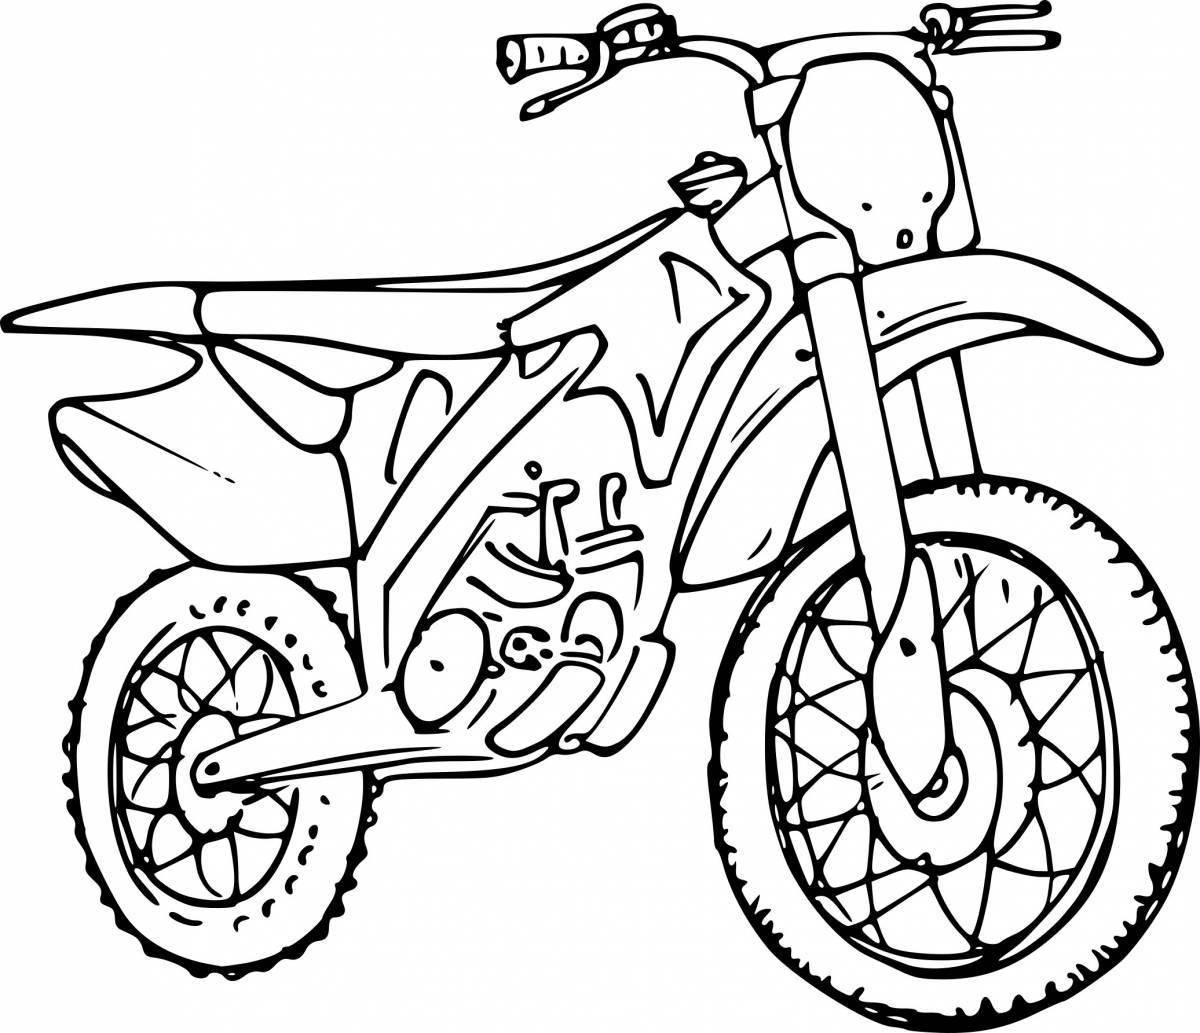 Attractive motorcycle coloring book for 4-5 year olds